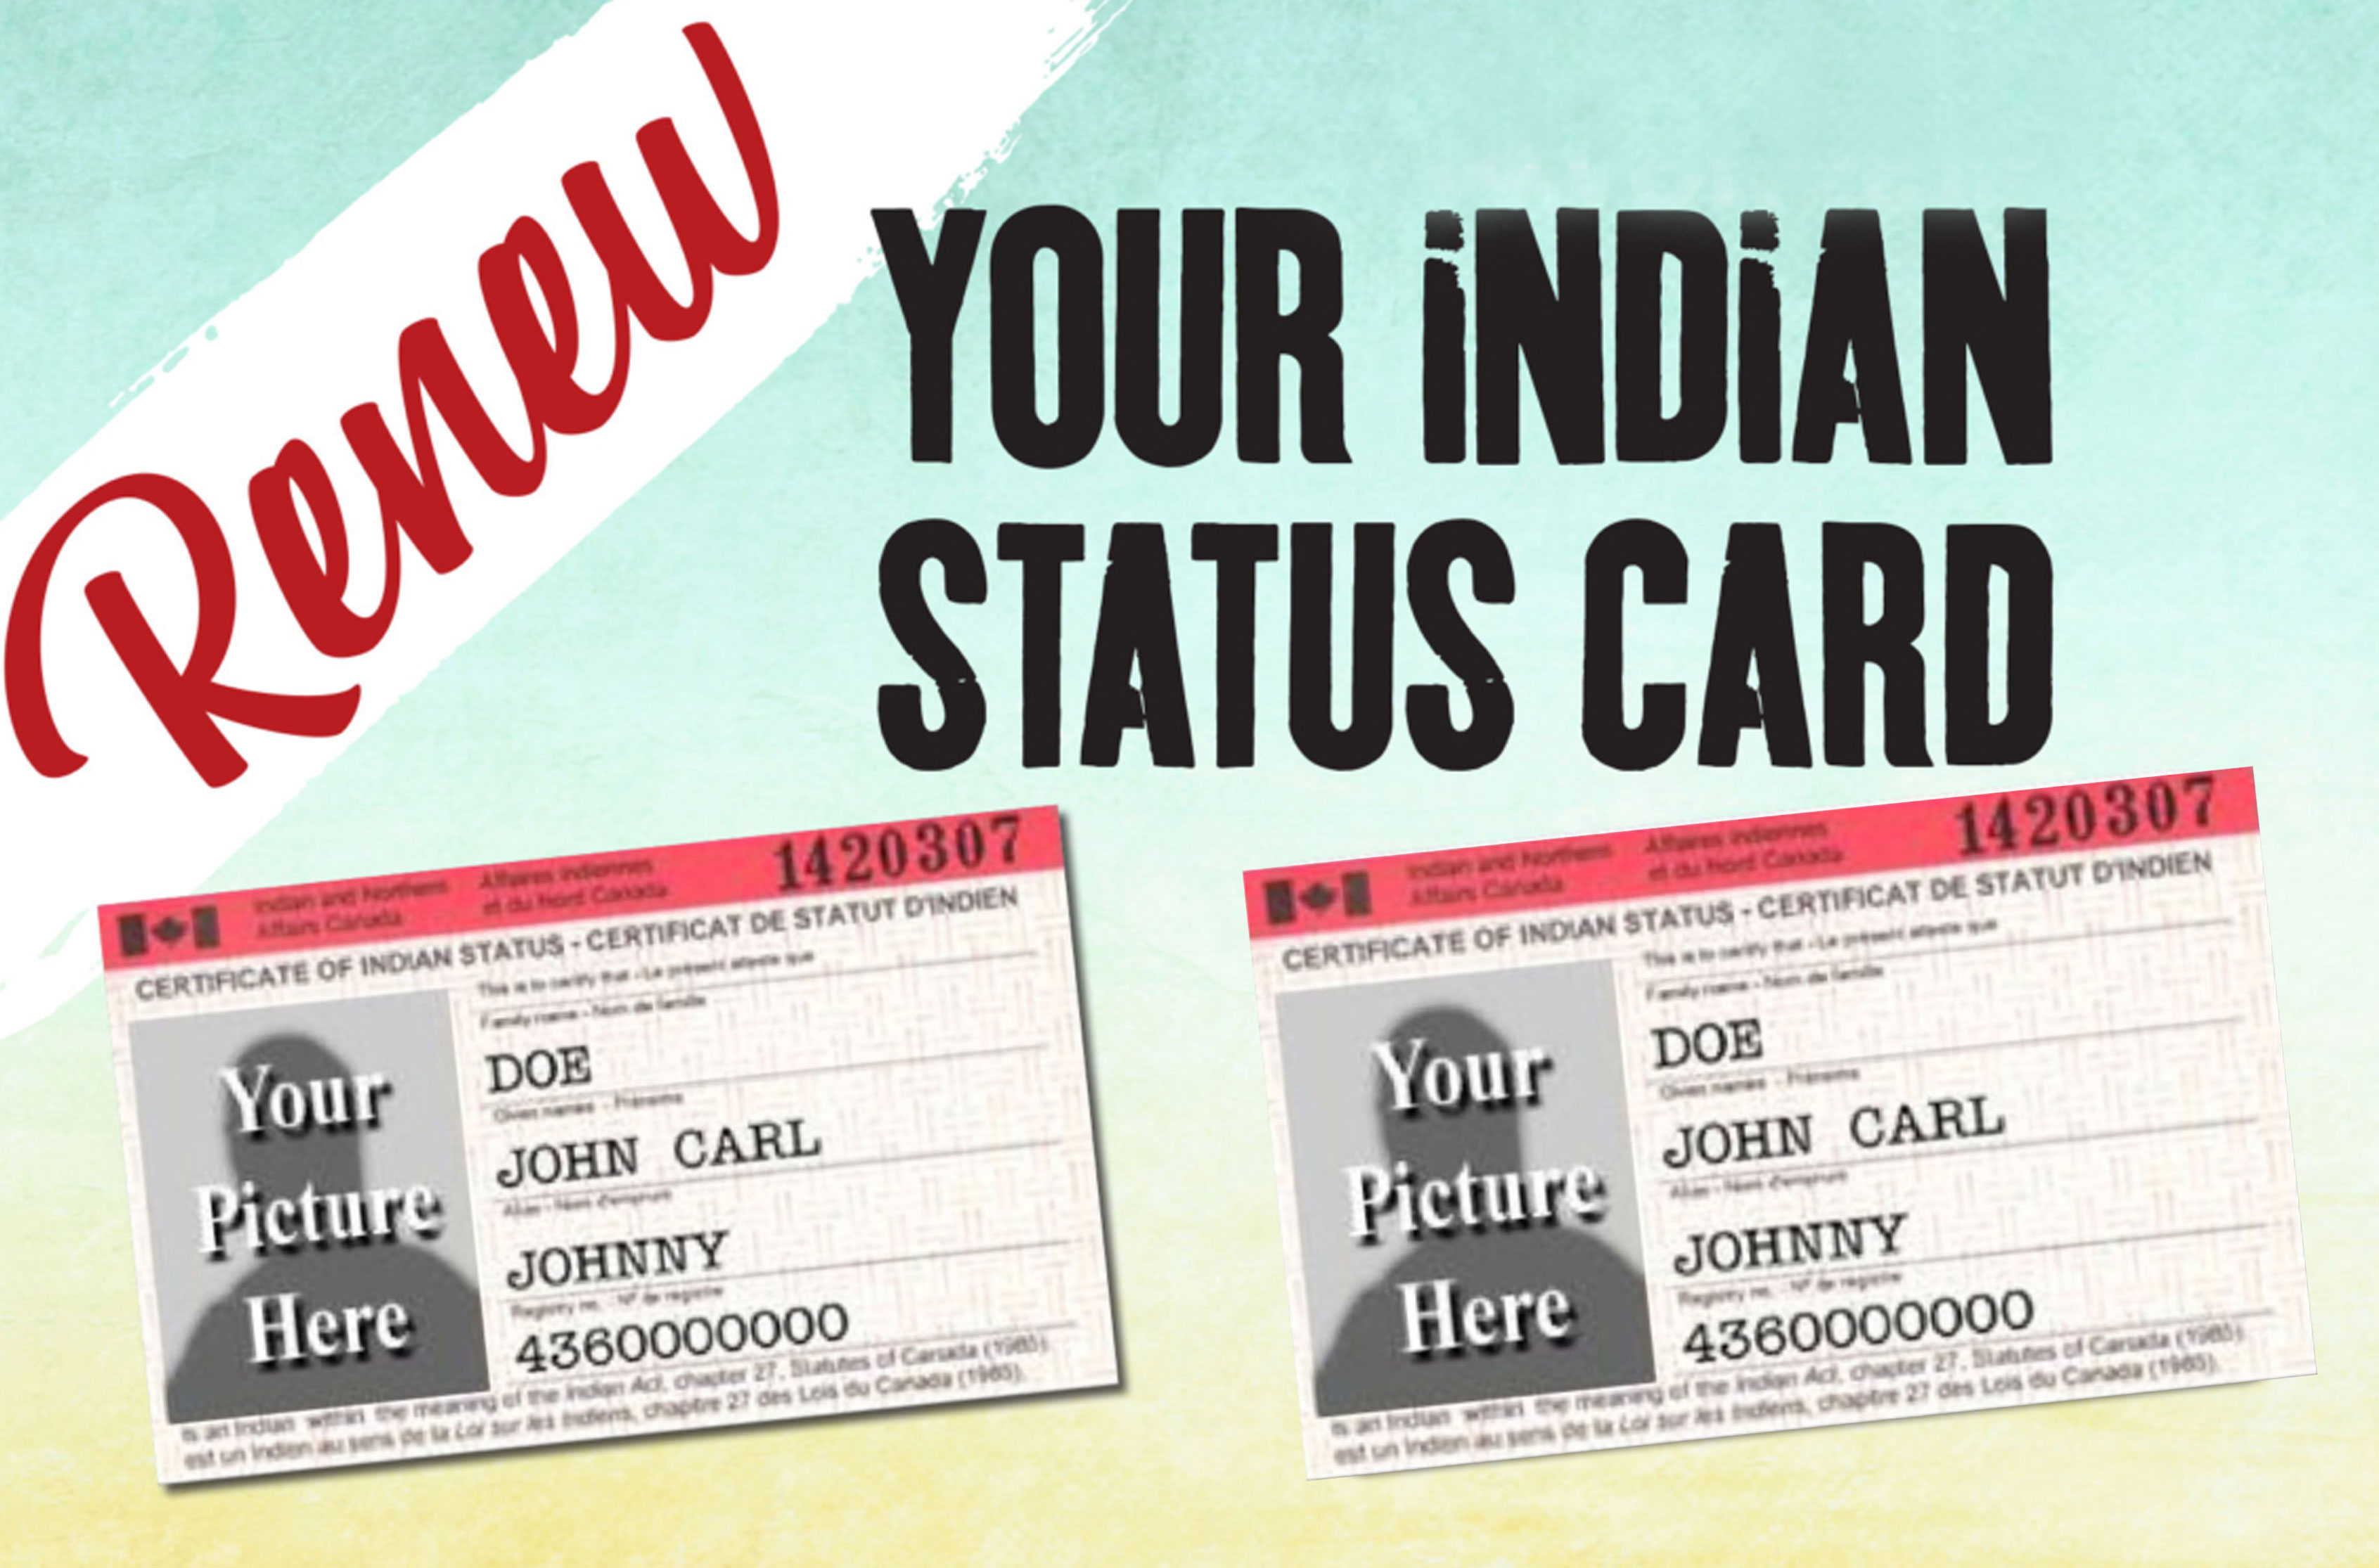 Renew Your Indian Status Card